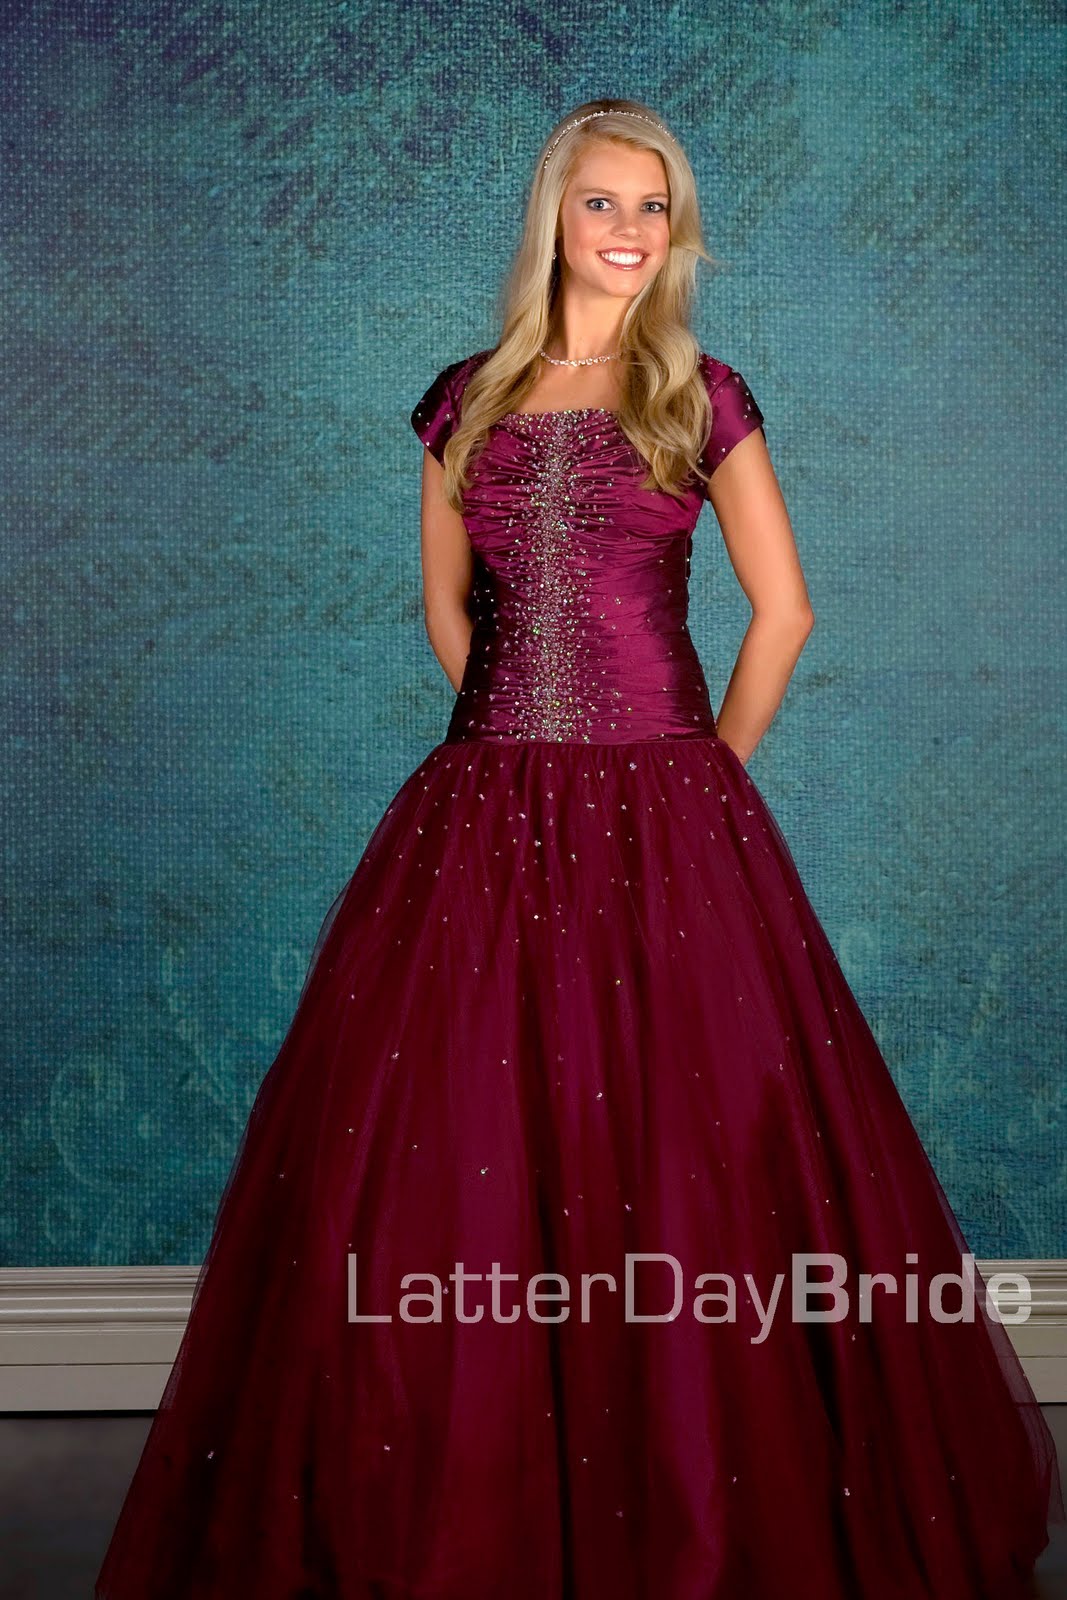 Mod Style Lounge: Pretty in a Prom Dress!